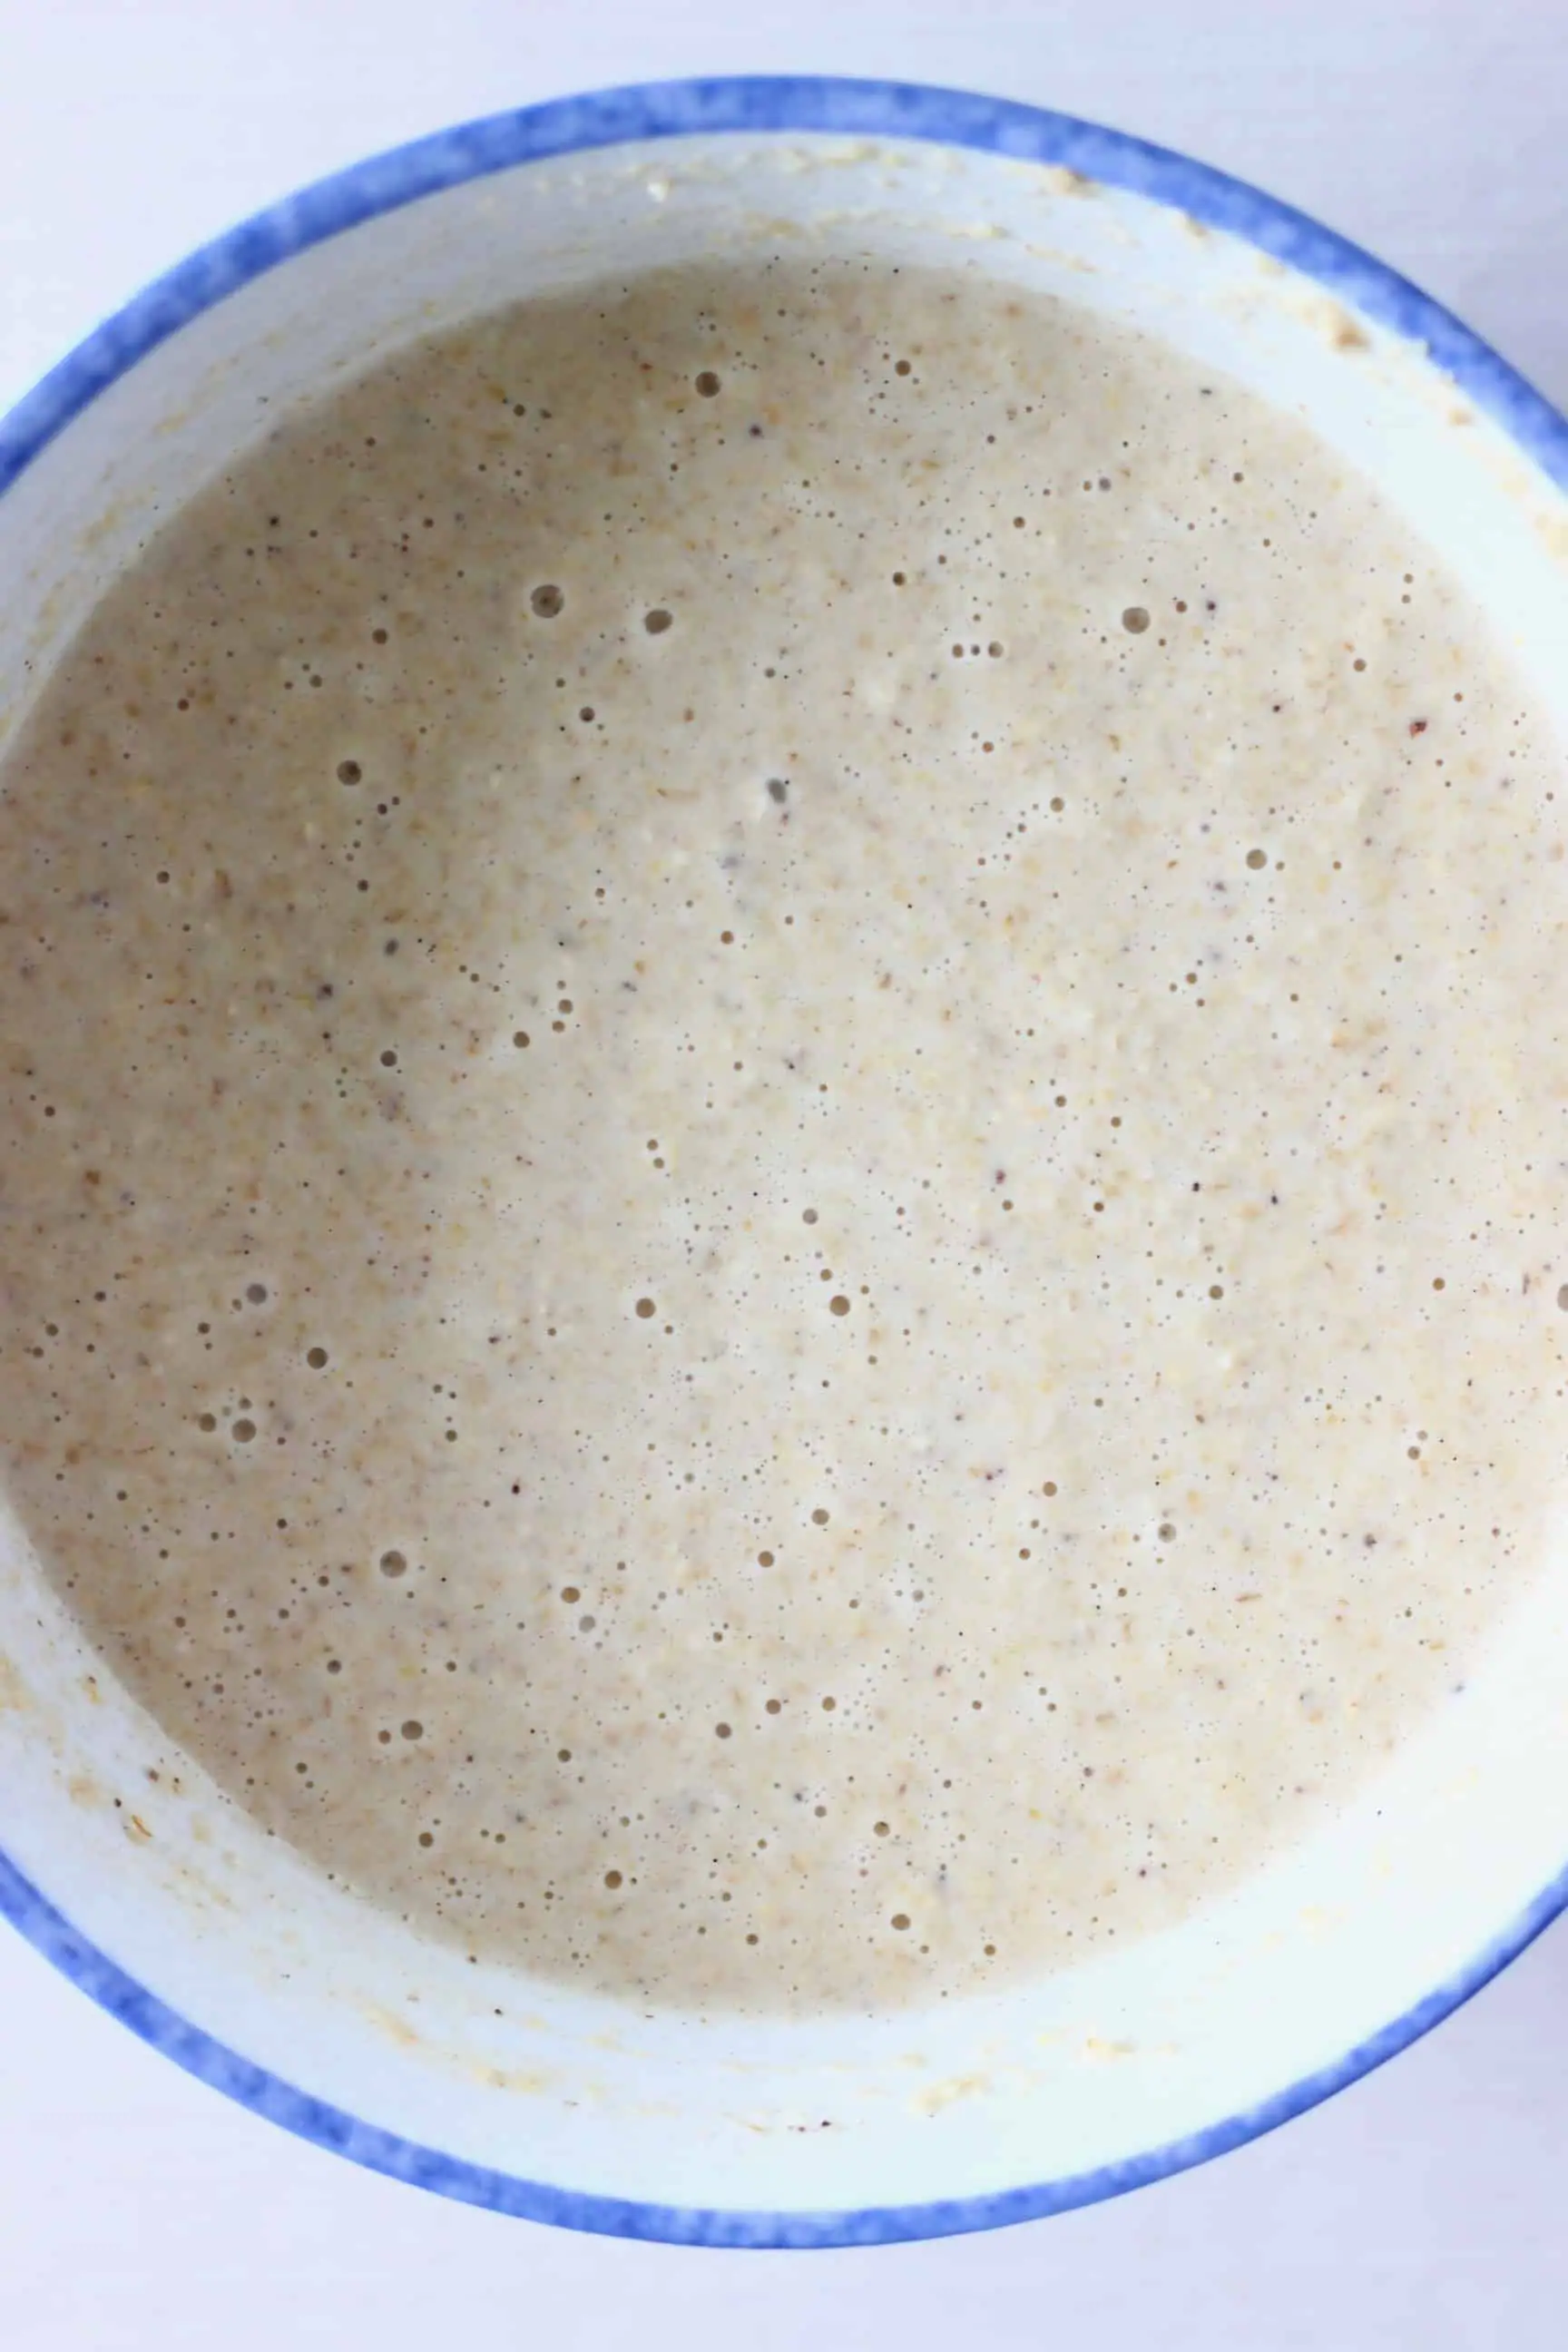 Raw oat flour pancake batter in a white bowl with a blue rim against a white background